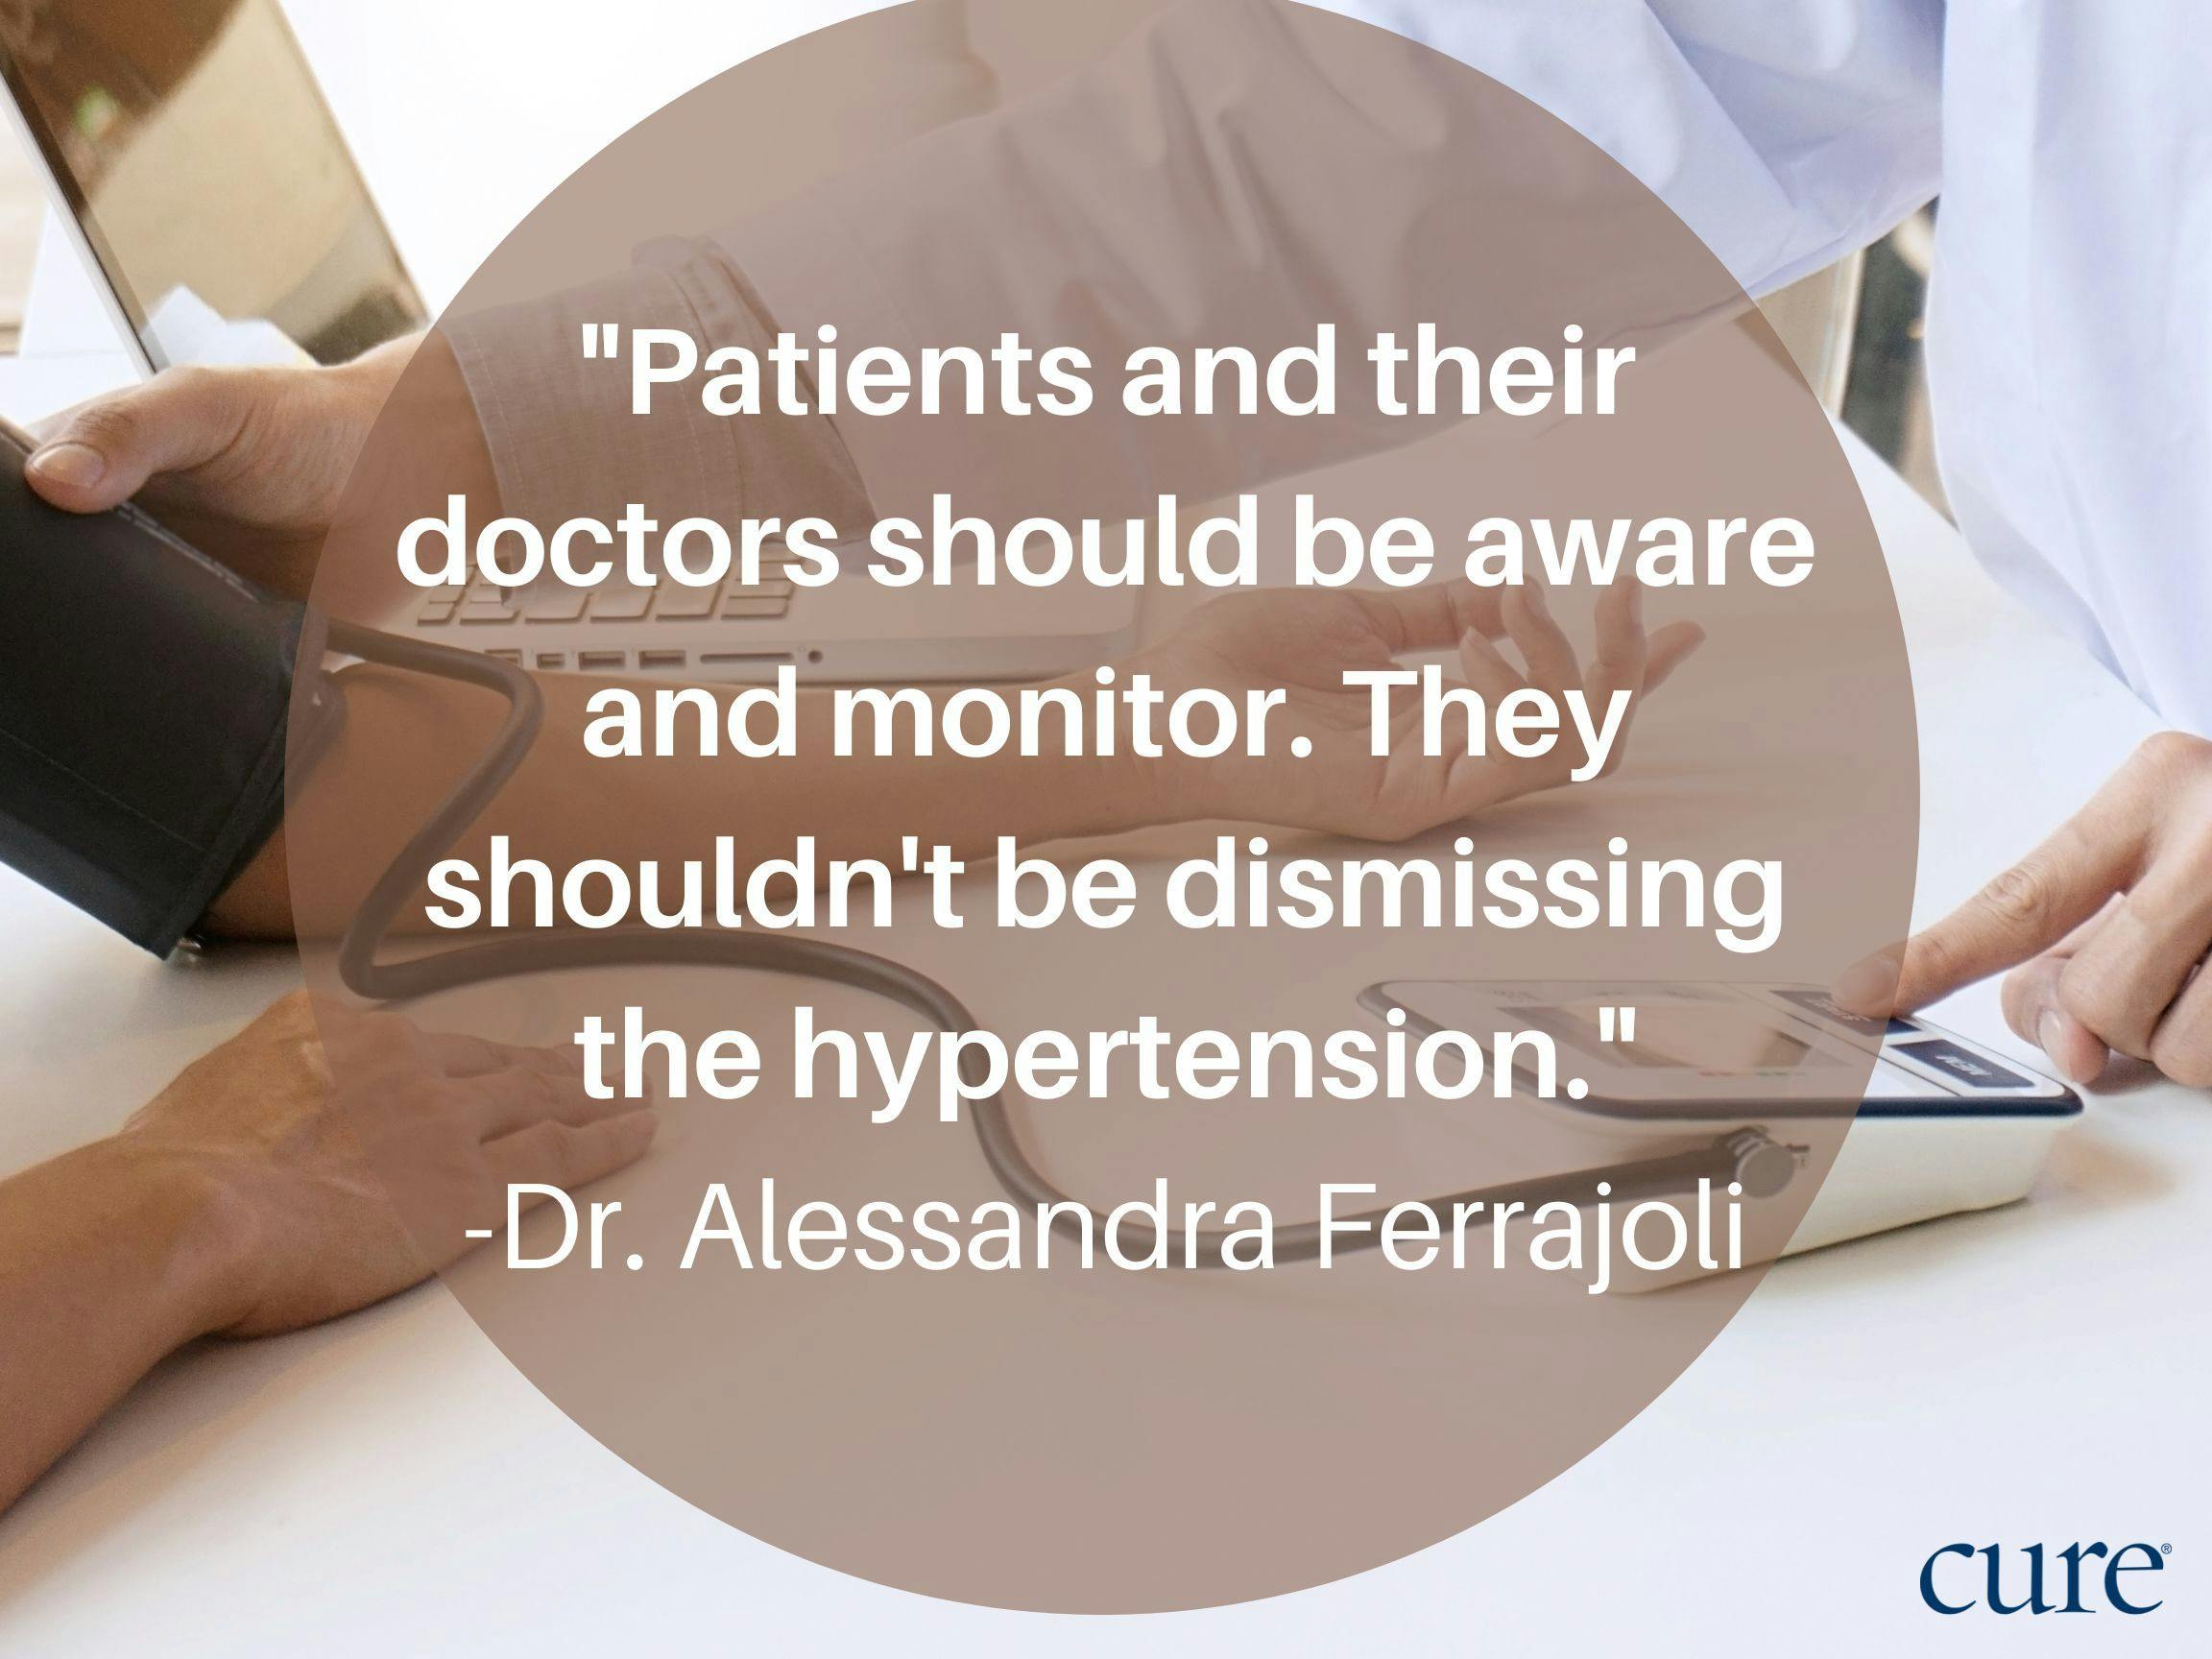 Quote: ""Patients and their doctors should be aware and monitor. They shouldn't be dismissing the hypertension." -Dr. Alessandra Ferrajoli" against an image of someone getting their bloos pressure taken